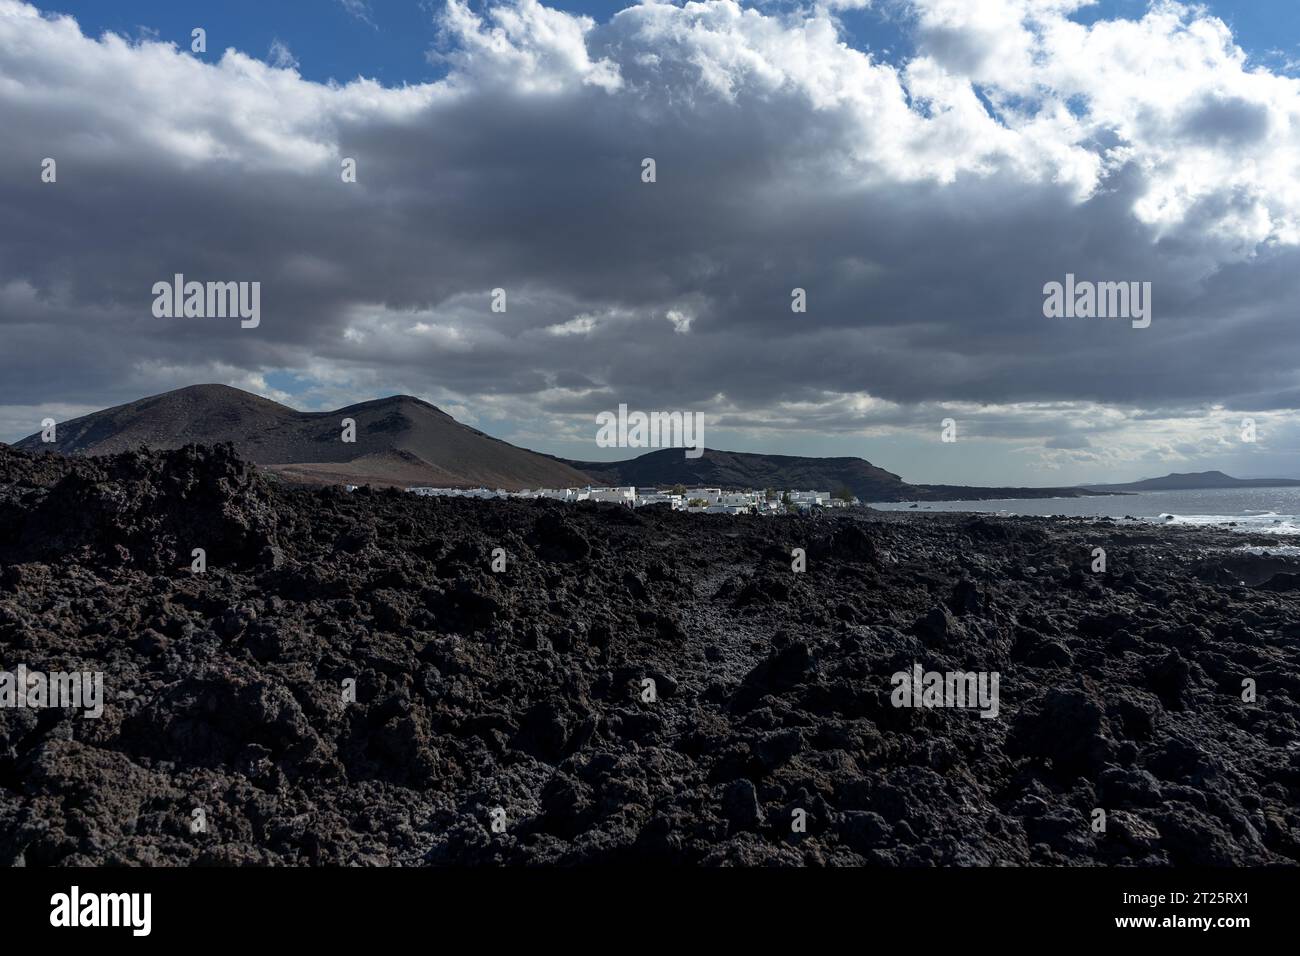 Spain, Lanzarote: lava field with the village of El Golfo in the background Stock Photo